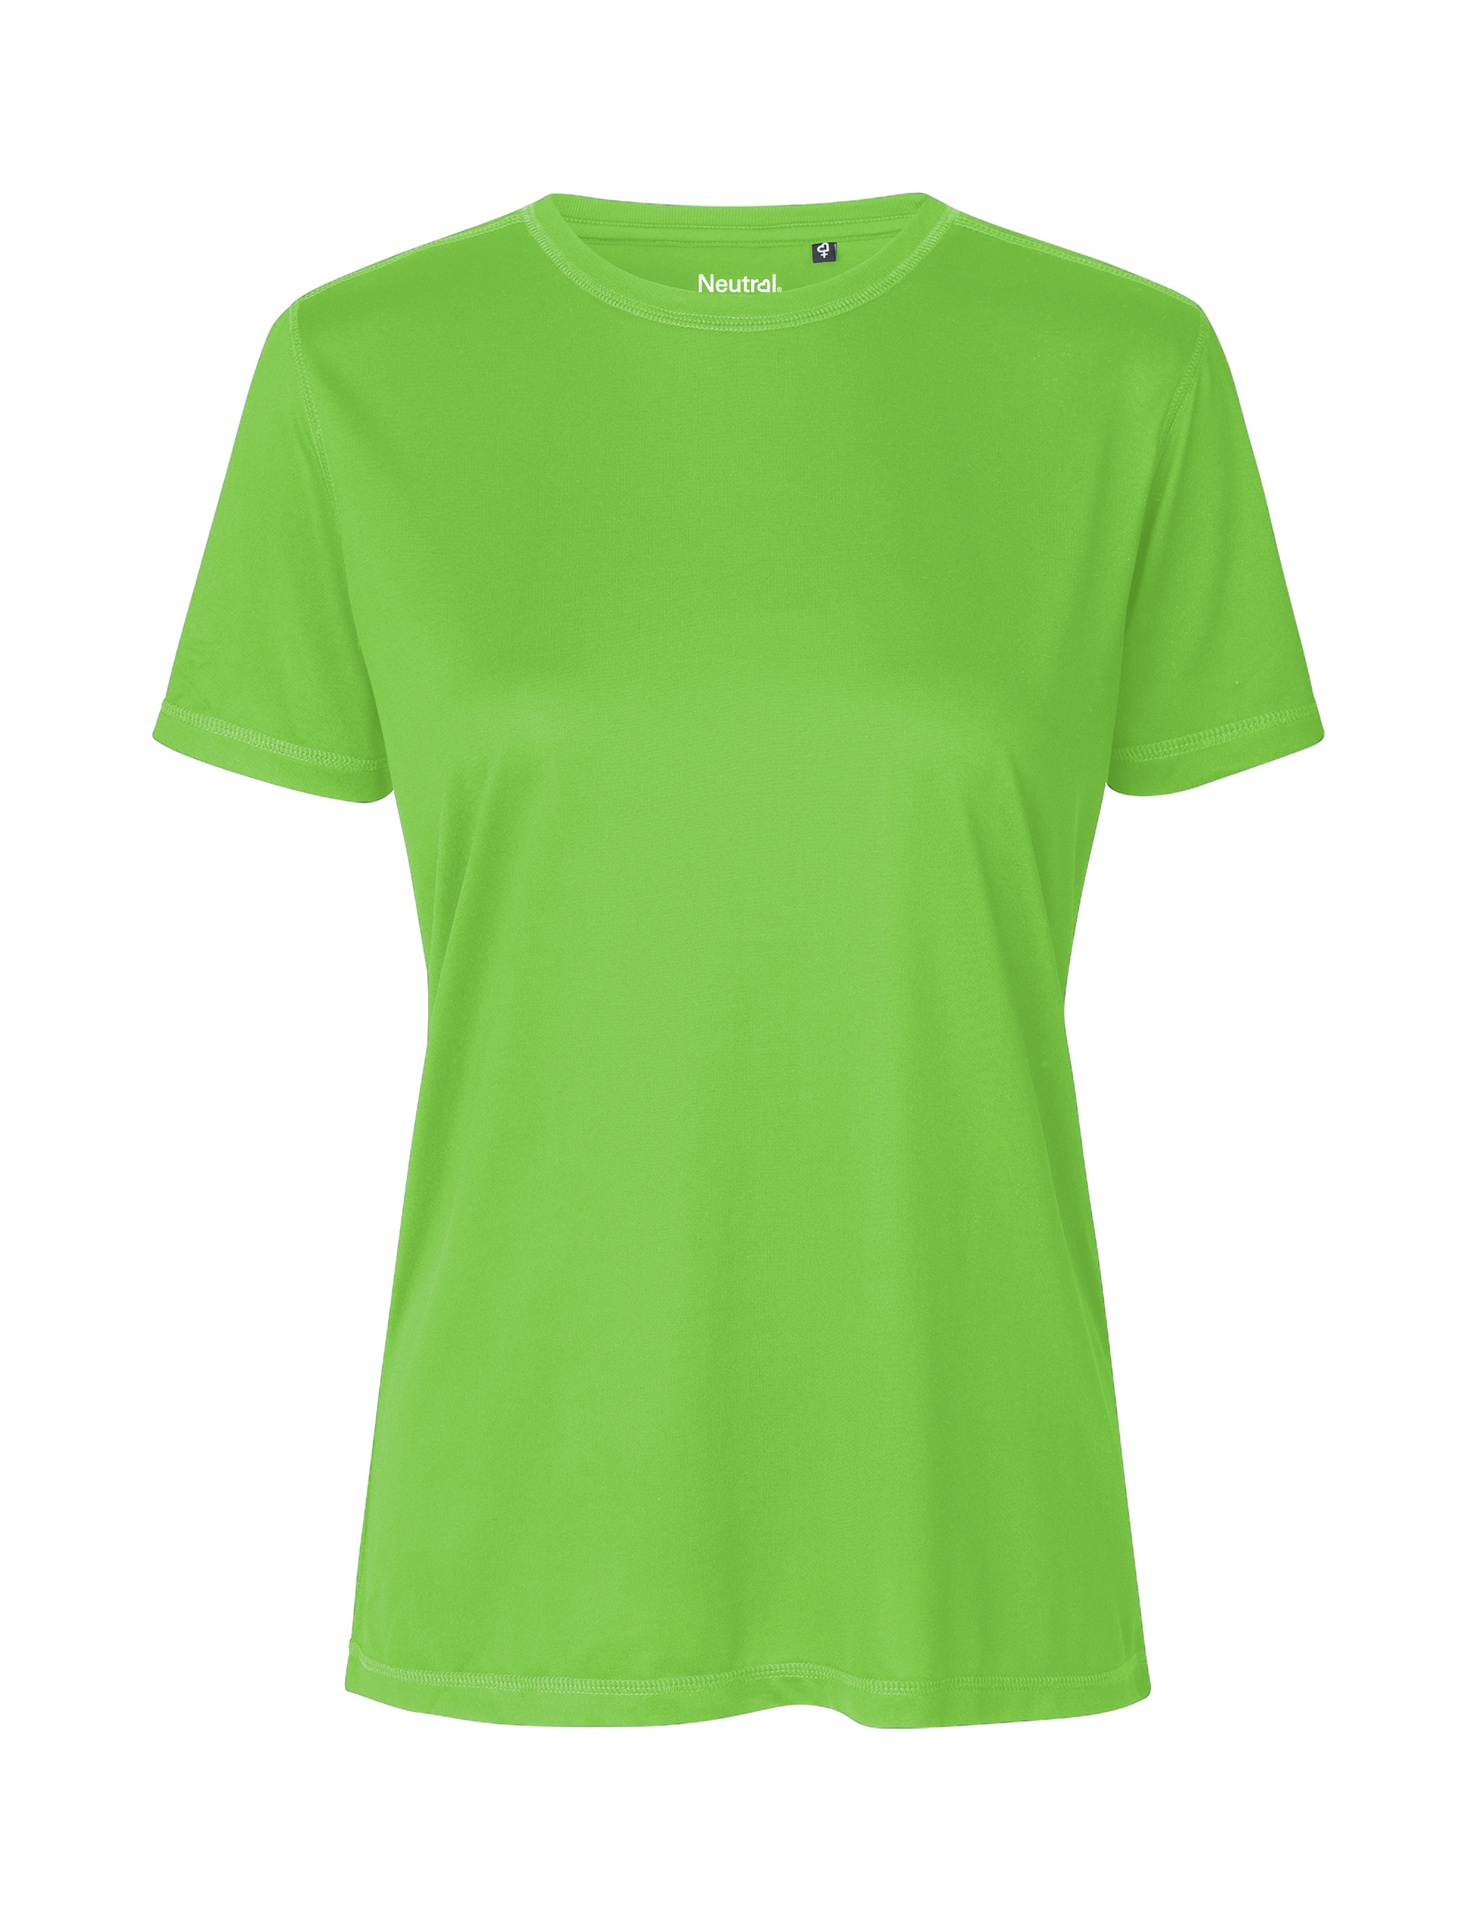 [PR/05225] Ladies Recycled Performance T-Shirt (Lime 12, L)